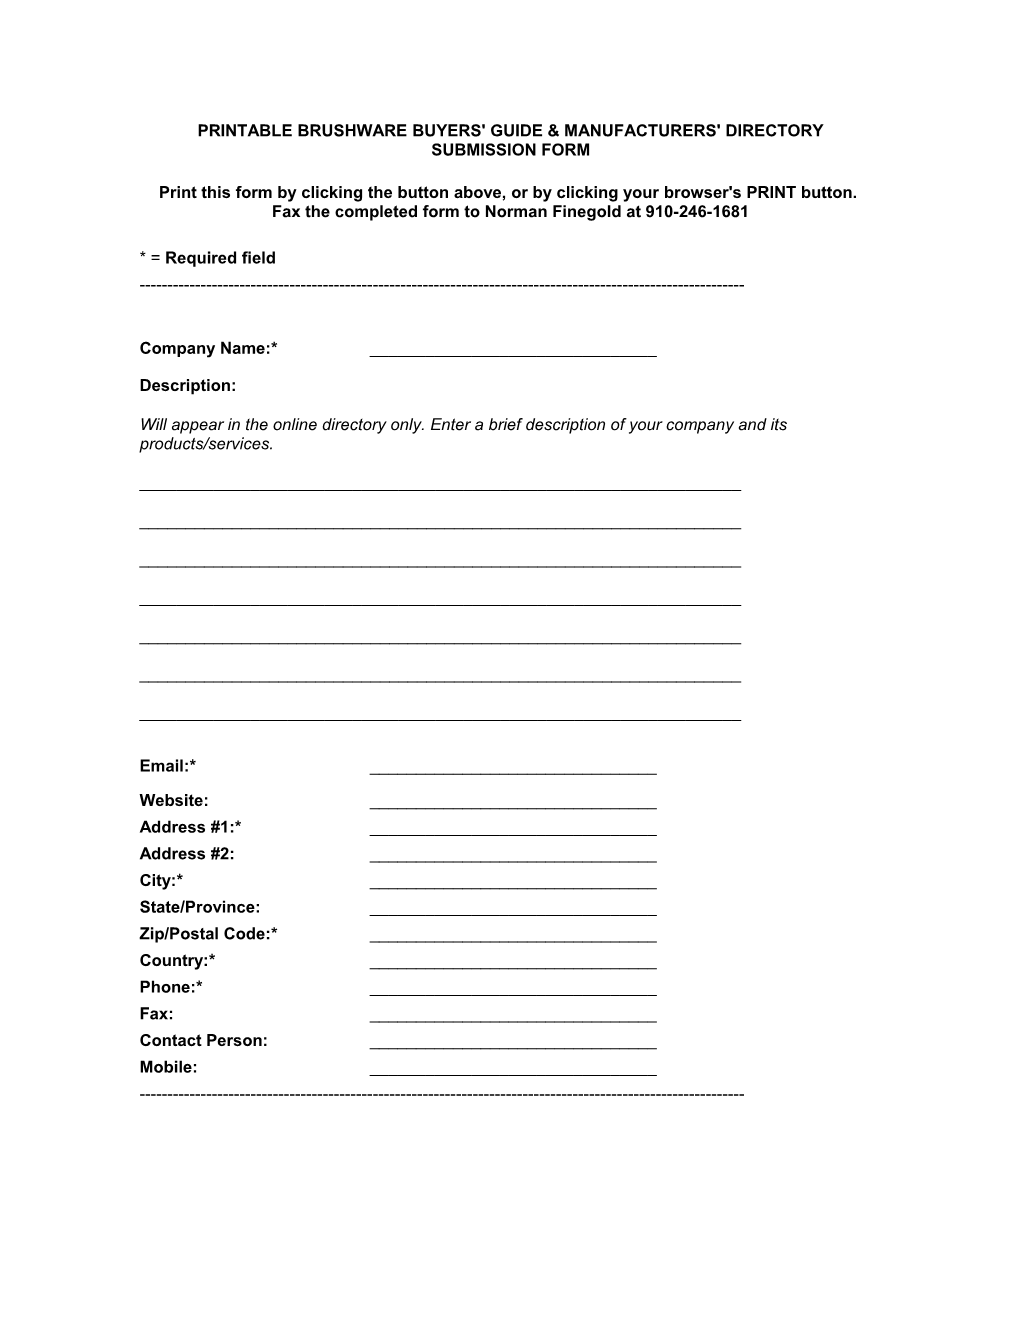 Printable Brushware Buyers' Guide & Manufacturers' Directory Submission Form